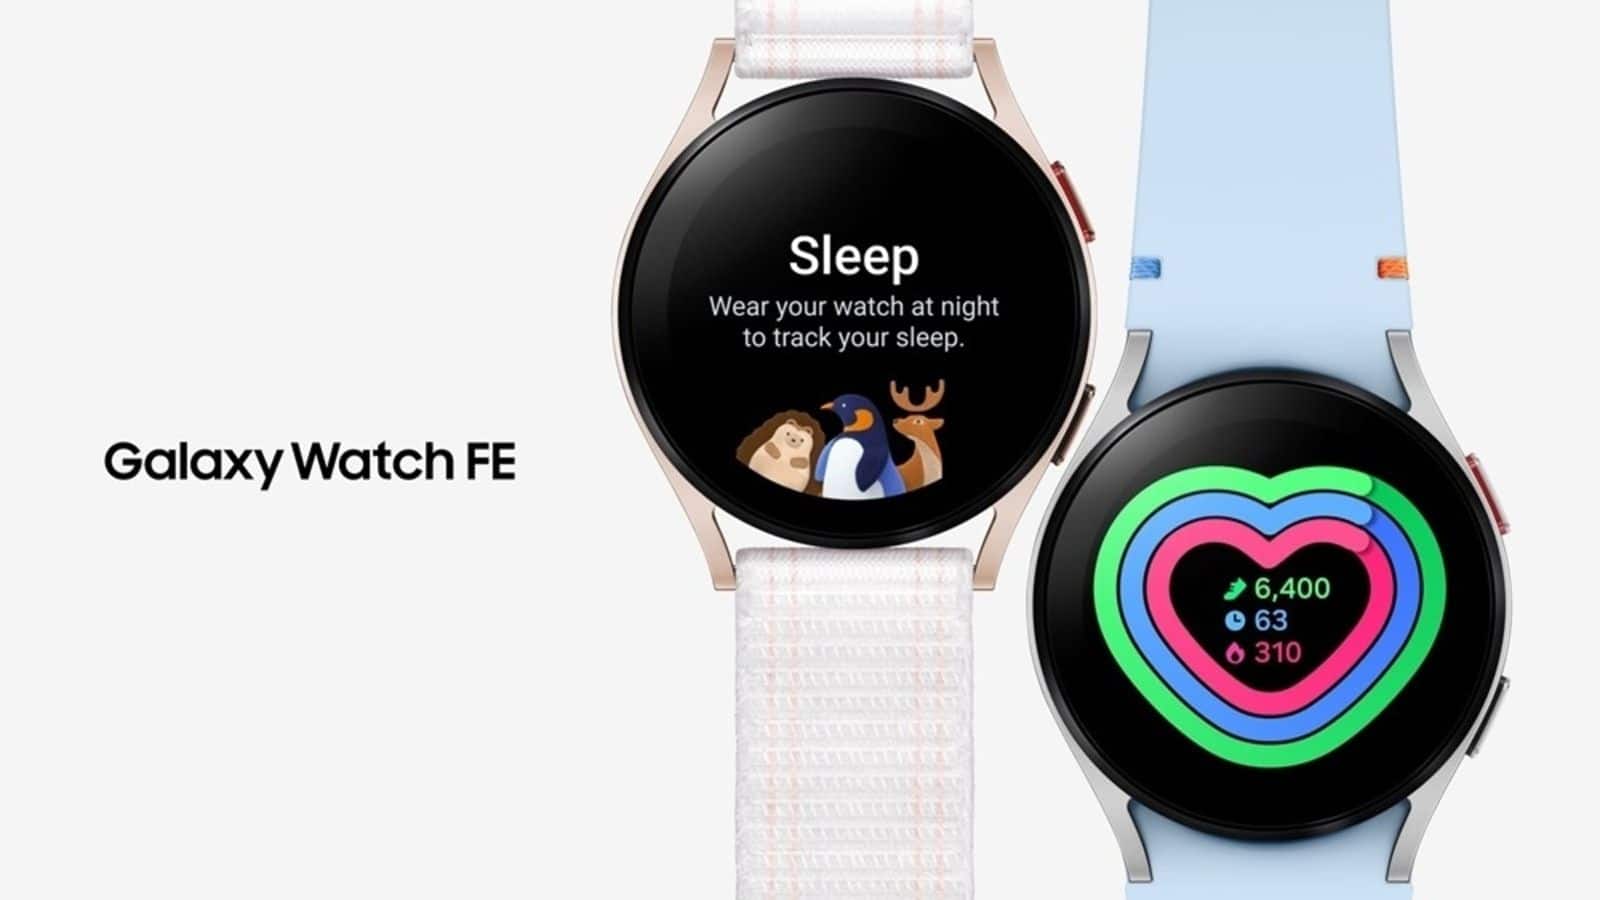 Samsung Galaxy Watch FE launched at $200: Check features